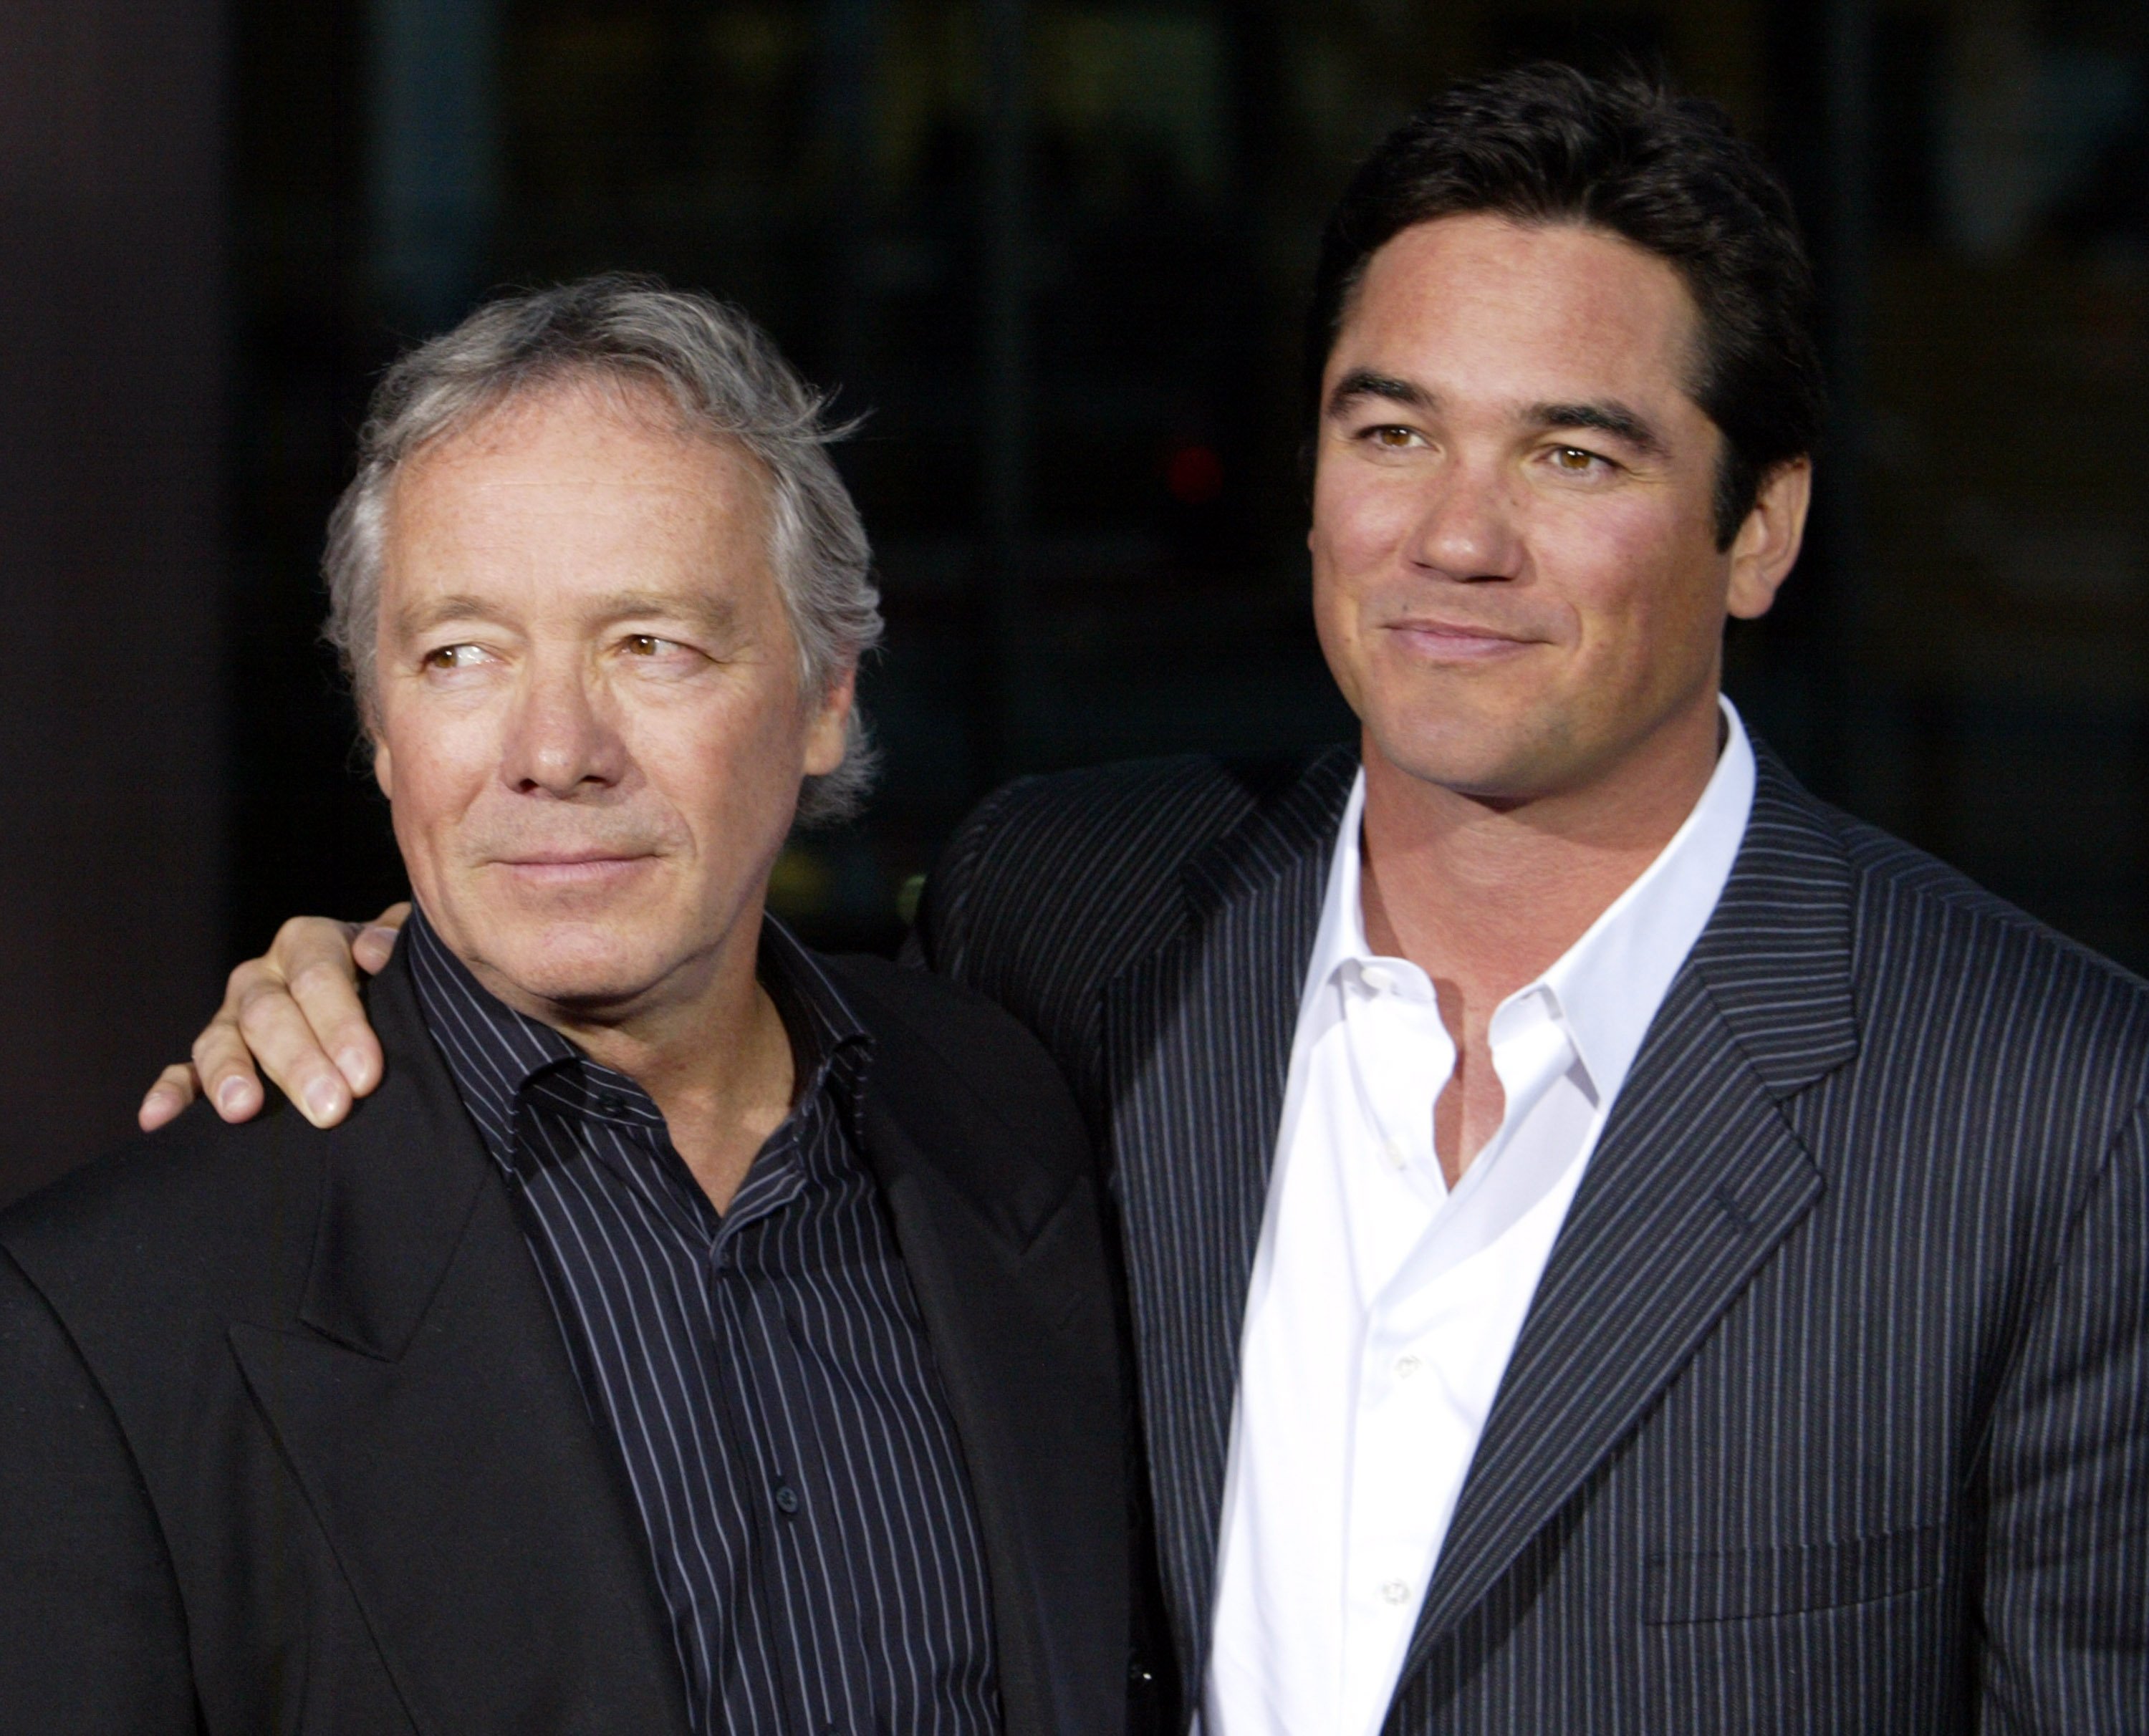 Christopher Cain and Dean Cain during "September Dawn" Los Angeles Screening - Arrivals at Director's Guild of America in Los Angeles, California, United States. | Source: Getty Images